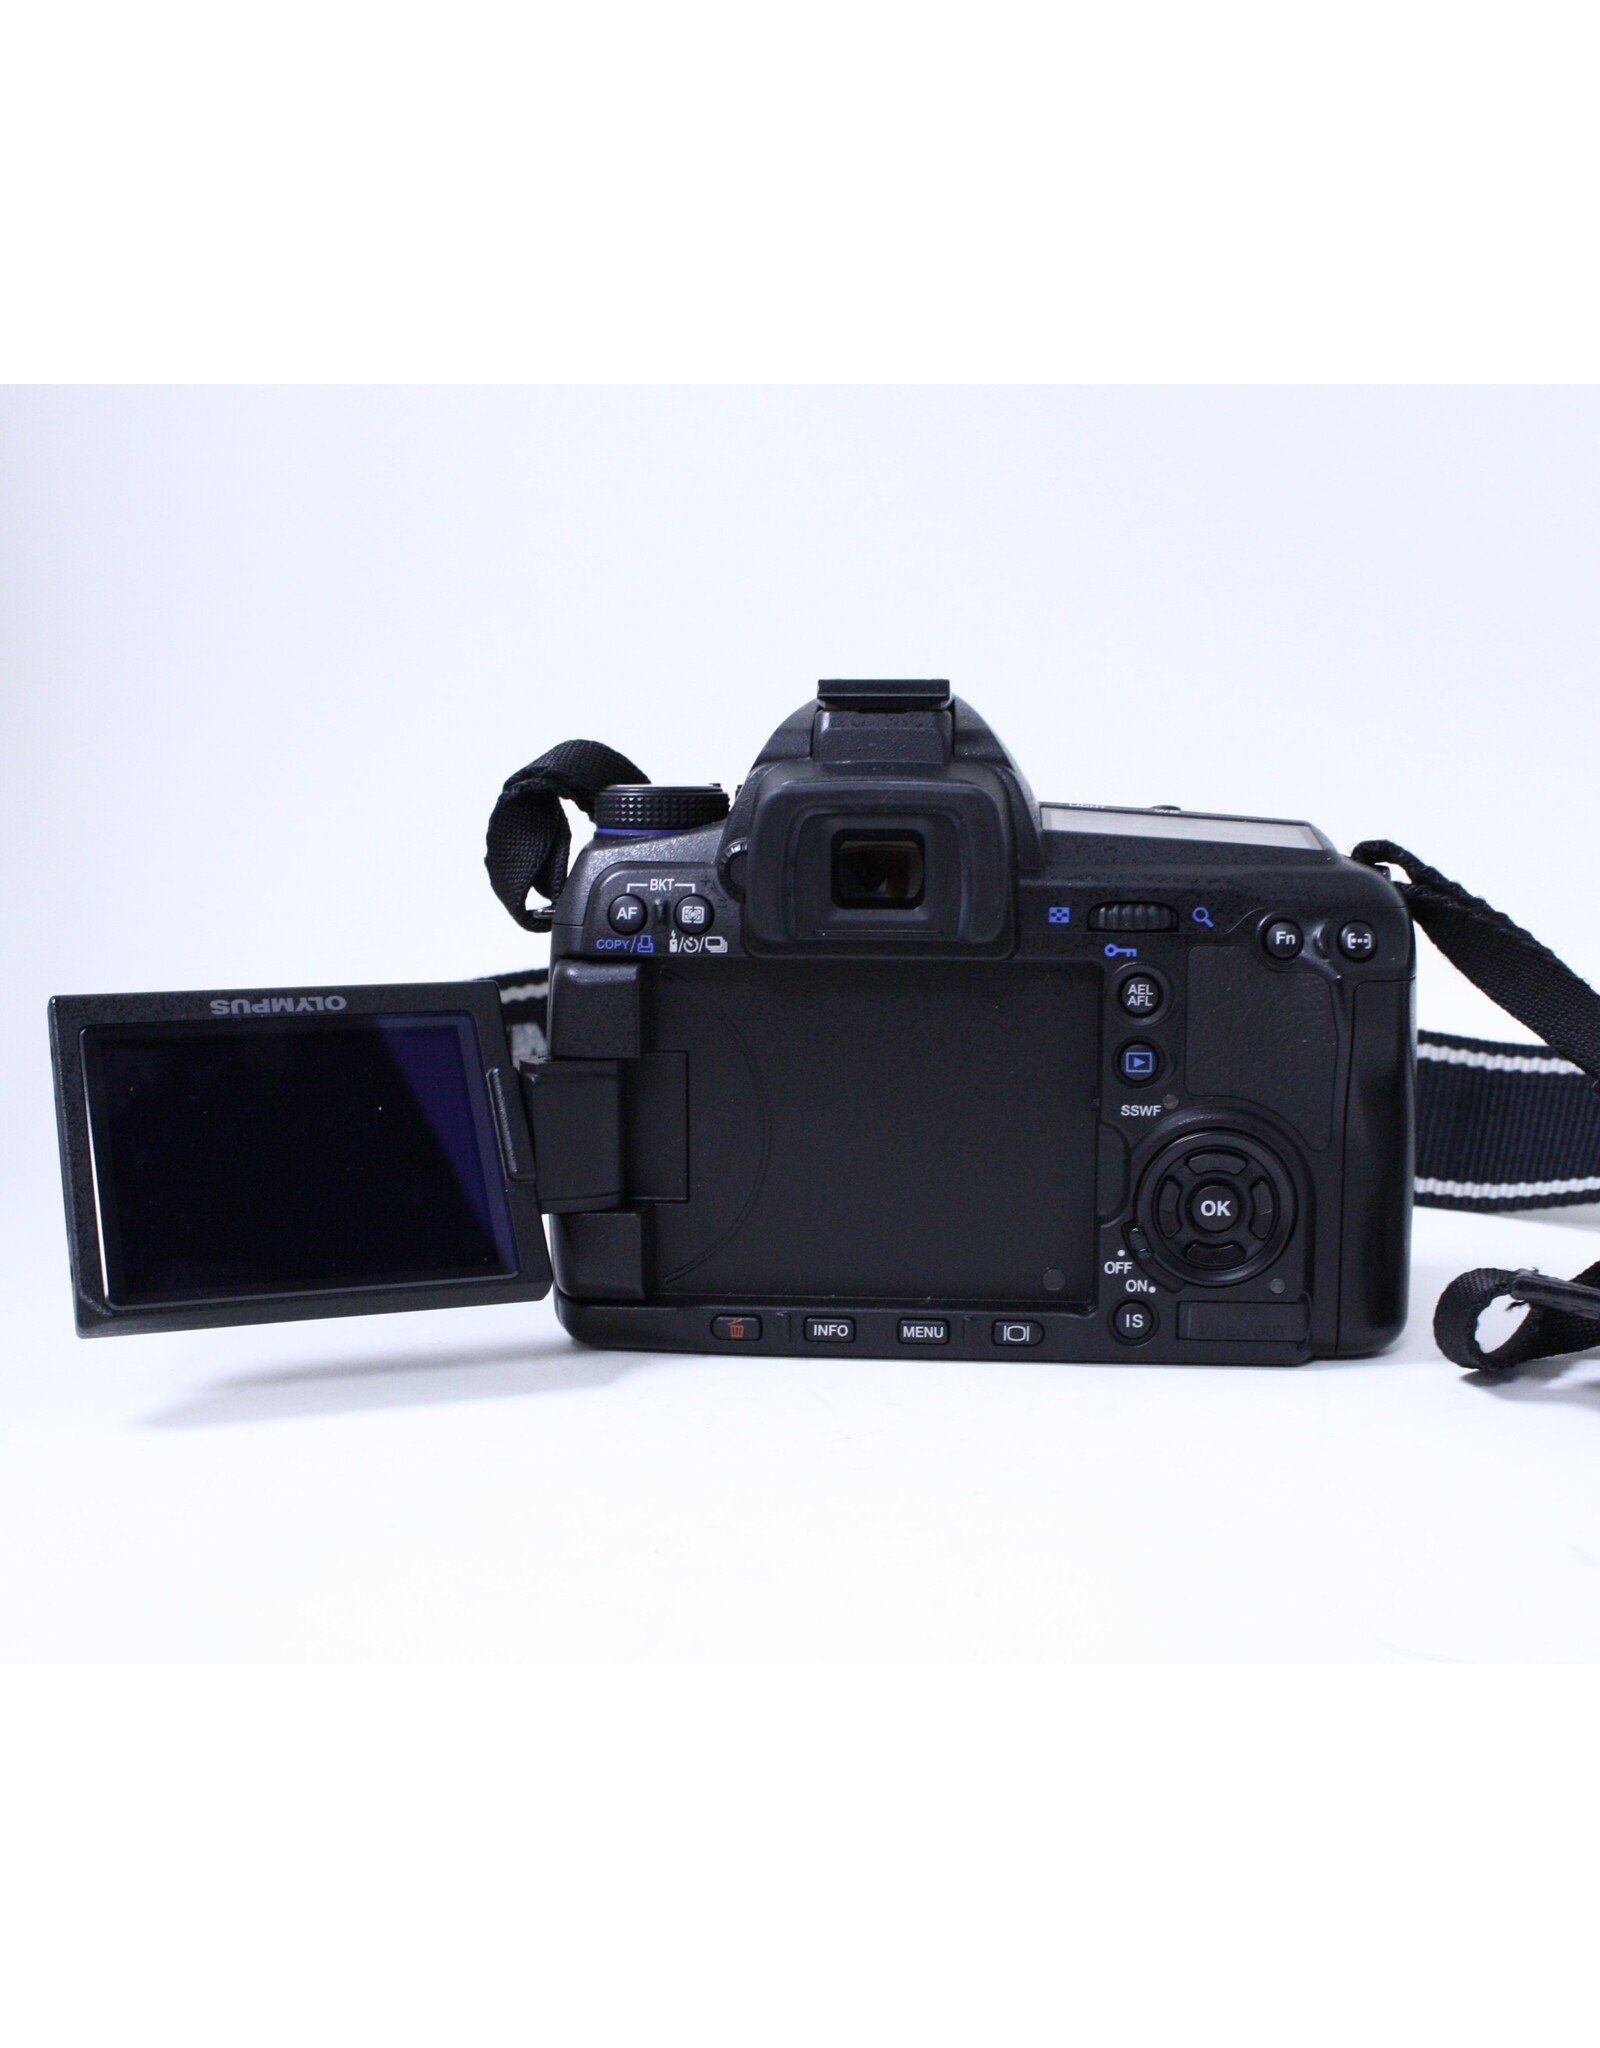 Olympus E30 DSLR Body with Accessories (Pre-owned)